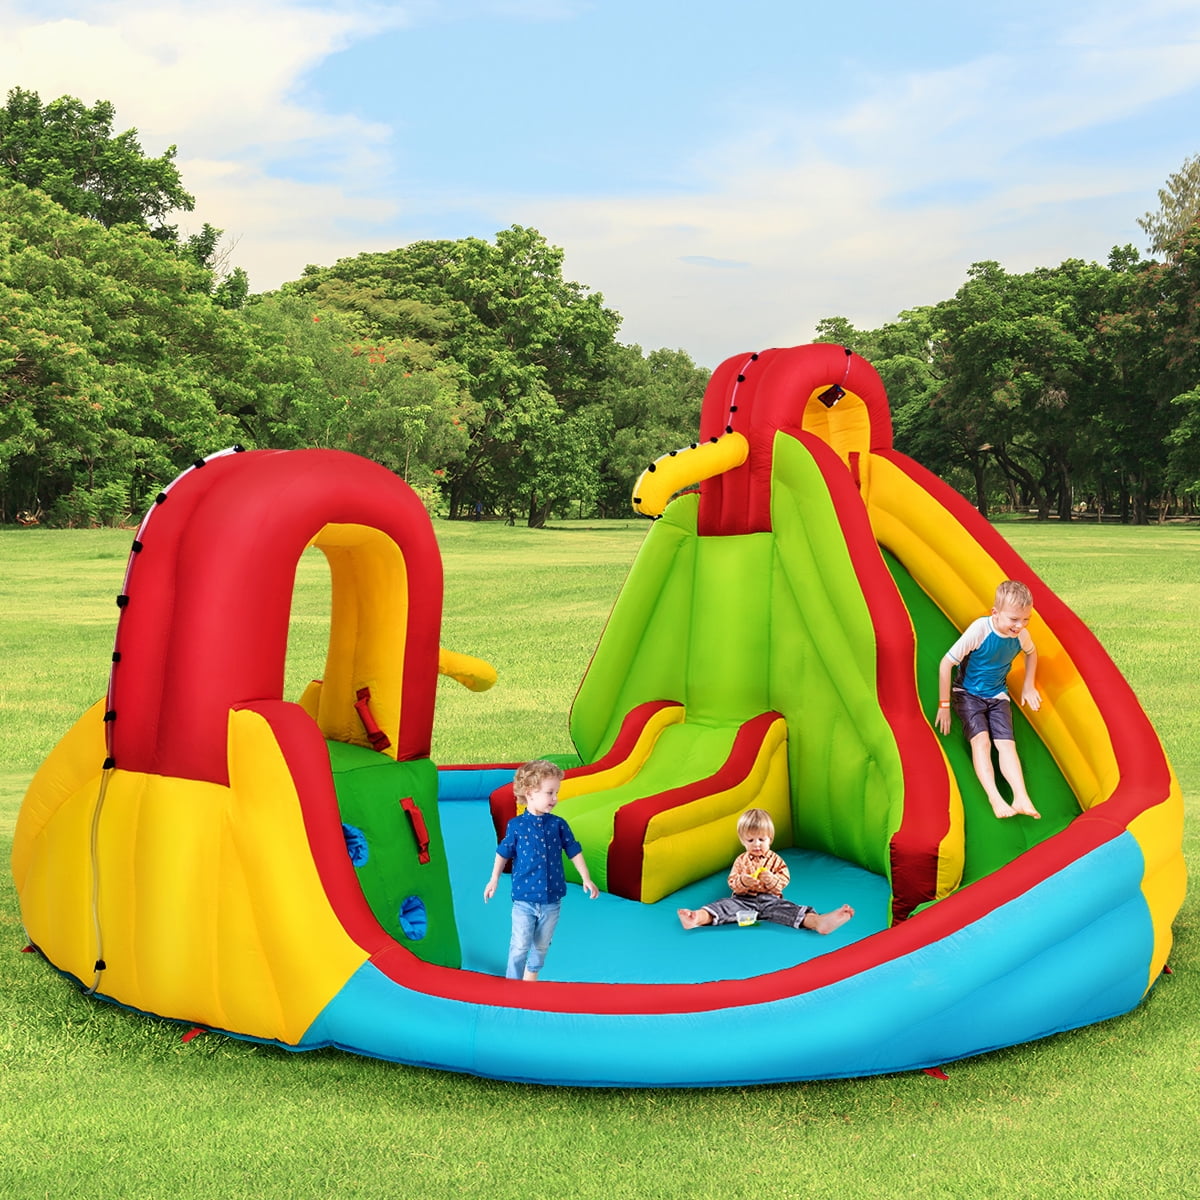 Inflatable Mighty Bouncy Splash Pool Slide Park Climbing Wall 2 Slide Great Gift 